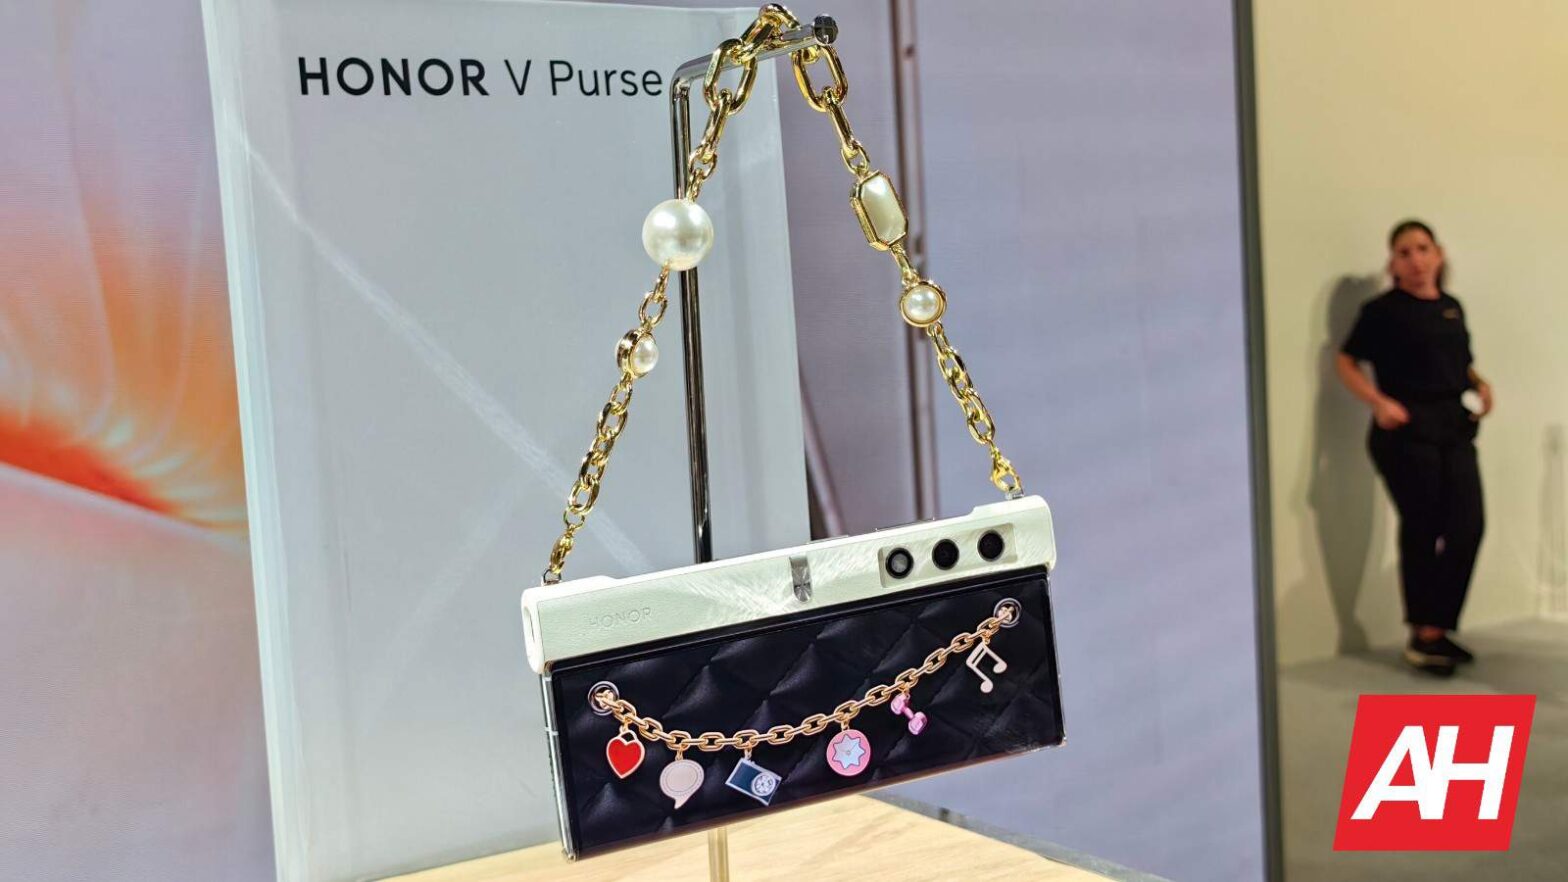 Take a closer look at the eye-catching HONOR V Purse